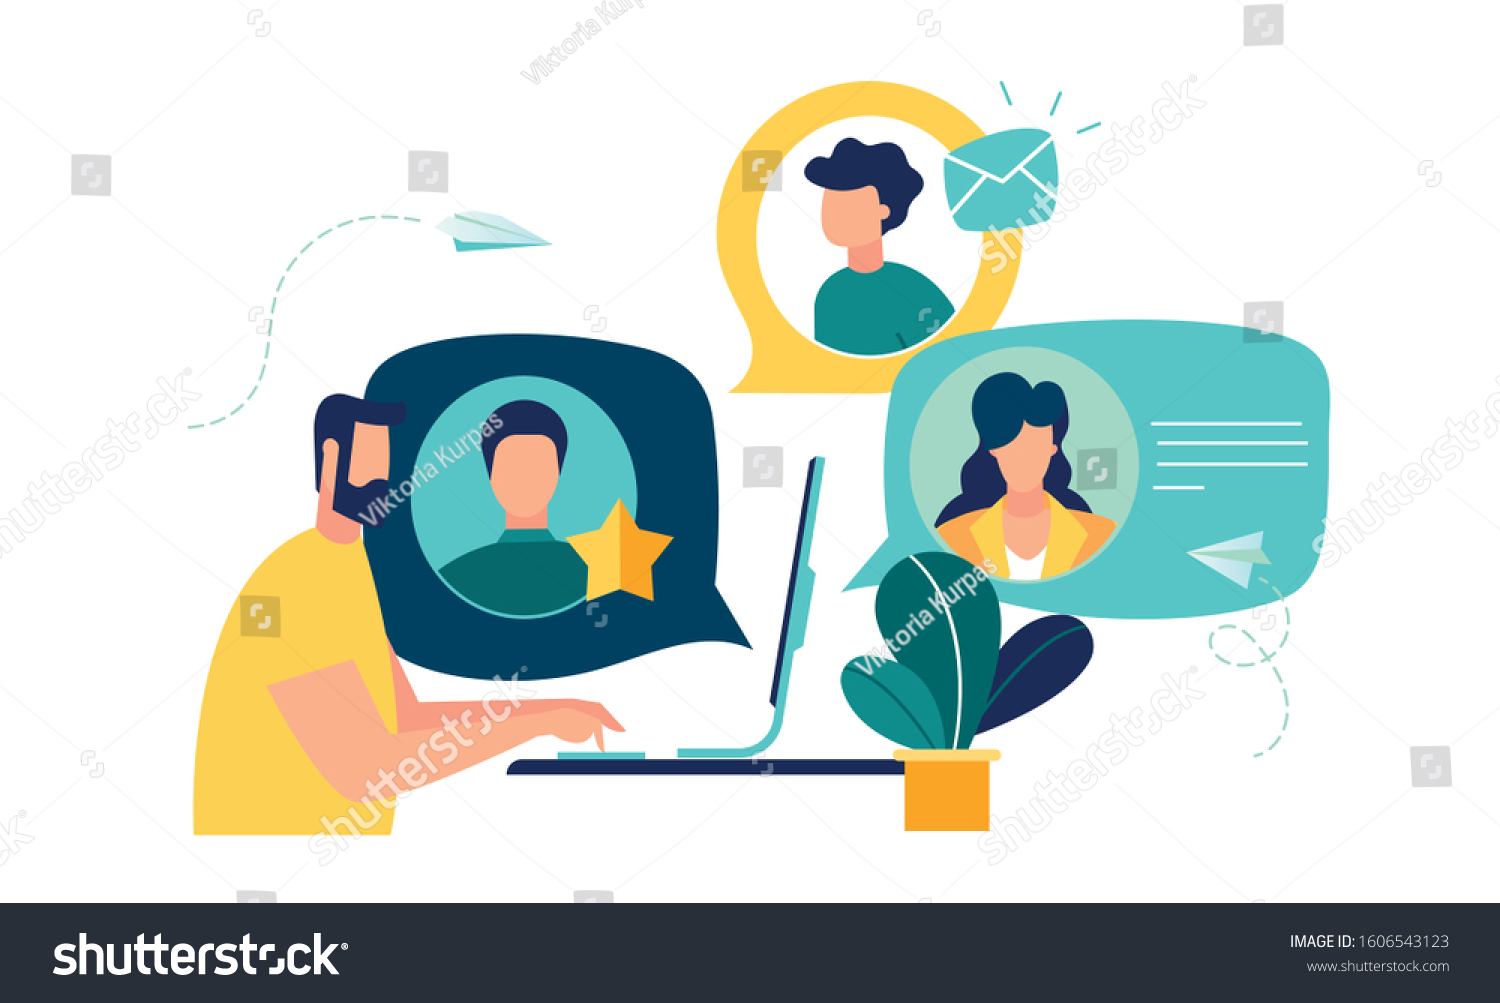 Vector colorful illustration of communication via the Internet, social networking,chat, video,news,messages,web site, search friends, mobile web graphics vector #1606543123